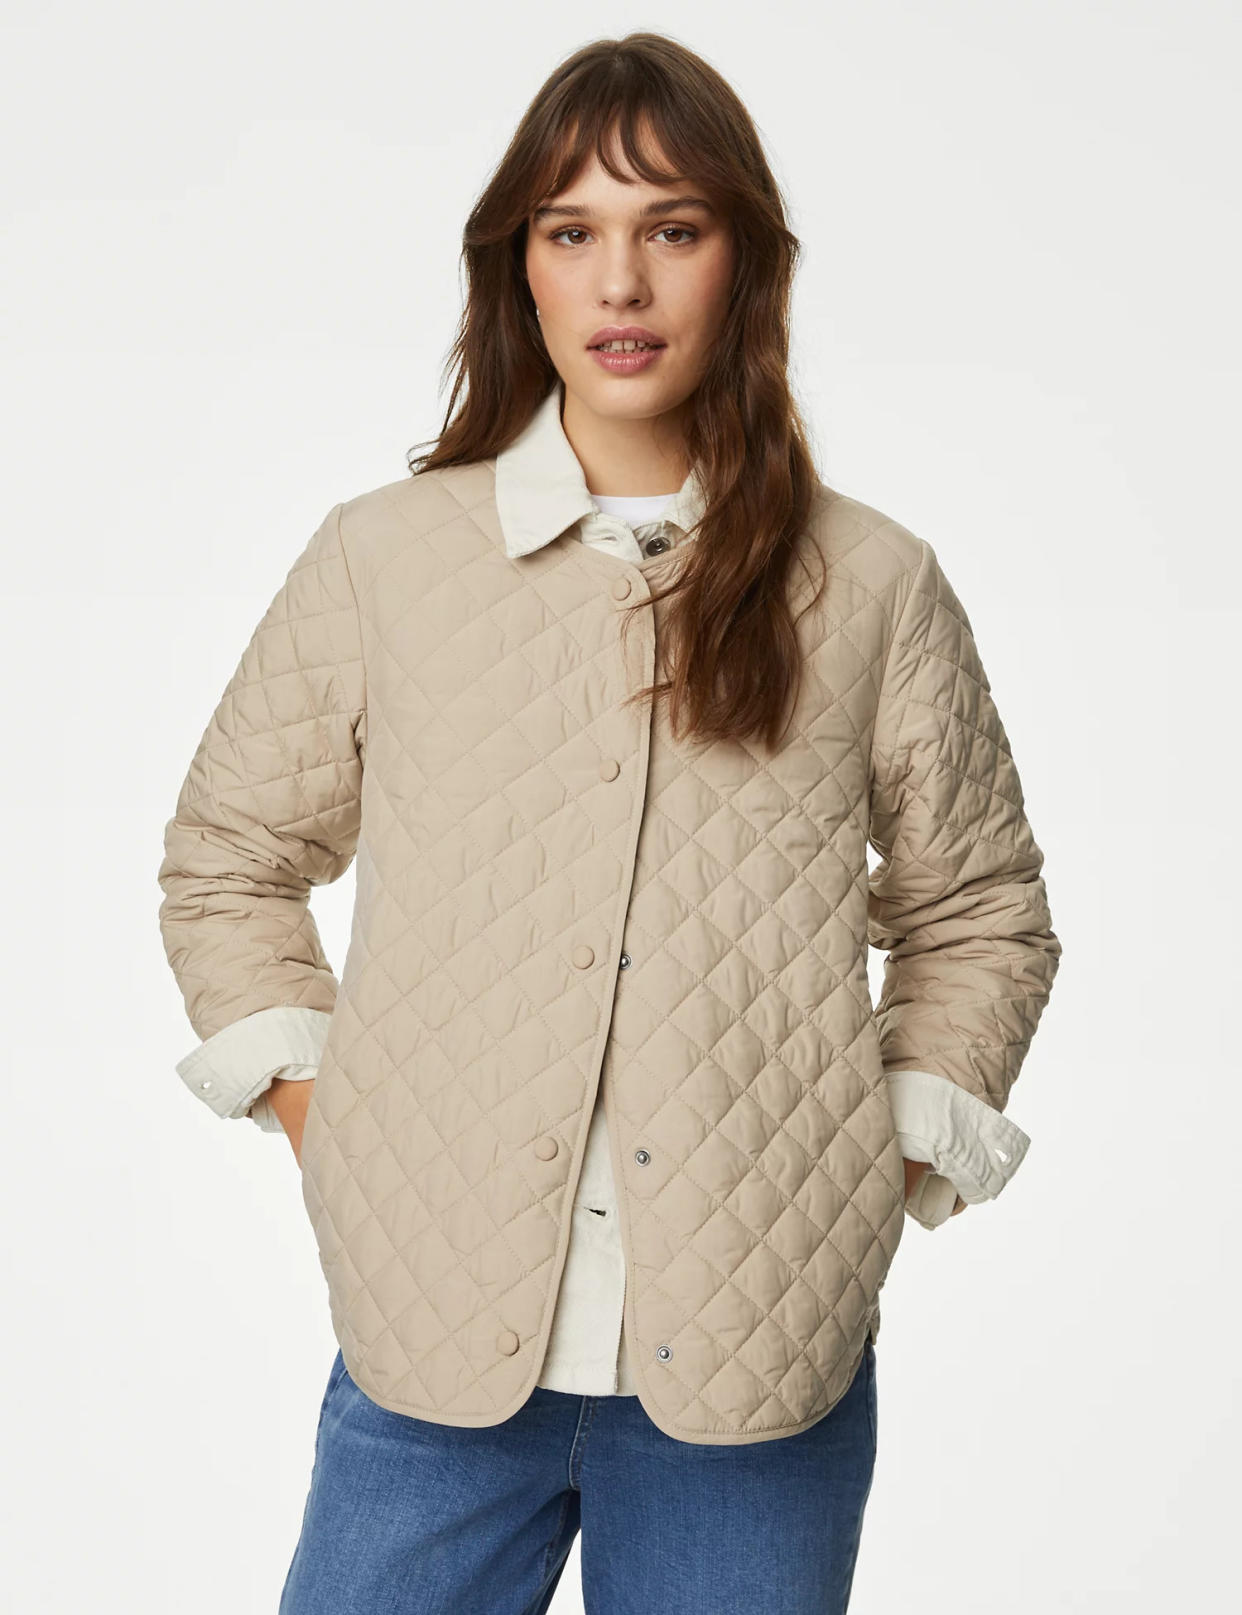 The lightweight jacket looks great open or buttoned up. (Marks & Spencer)